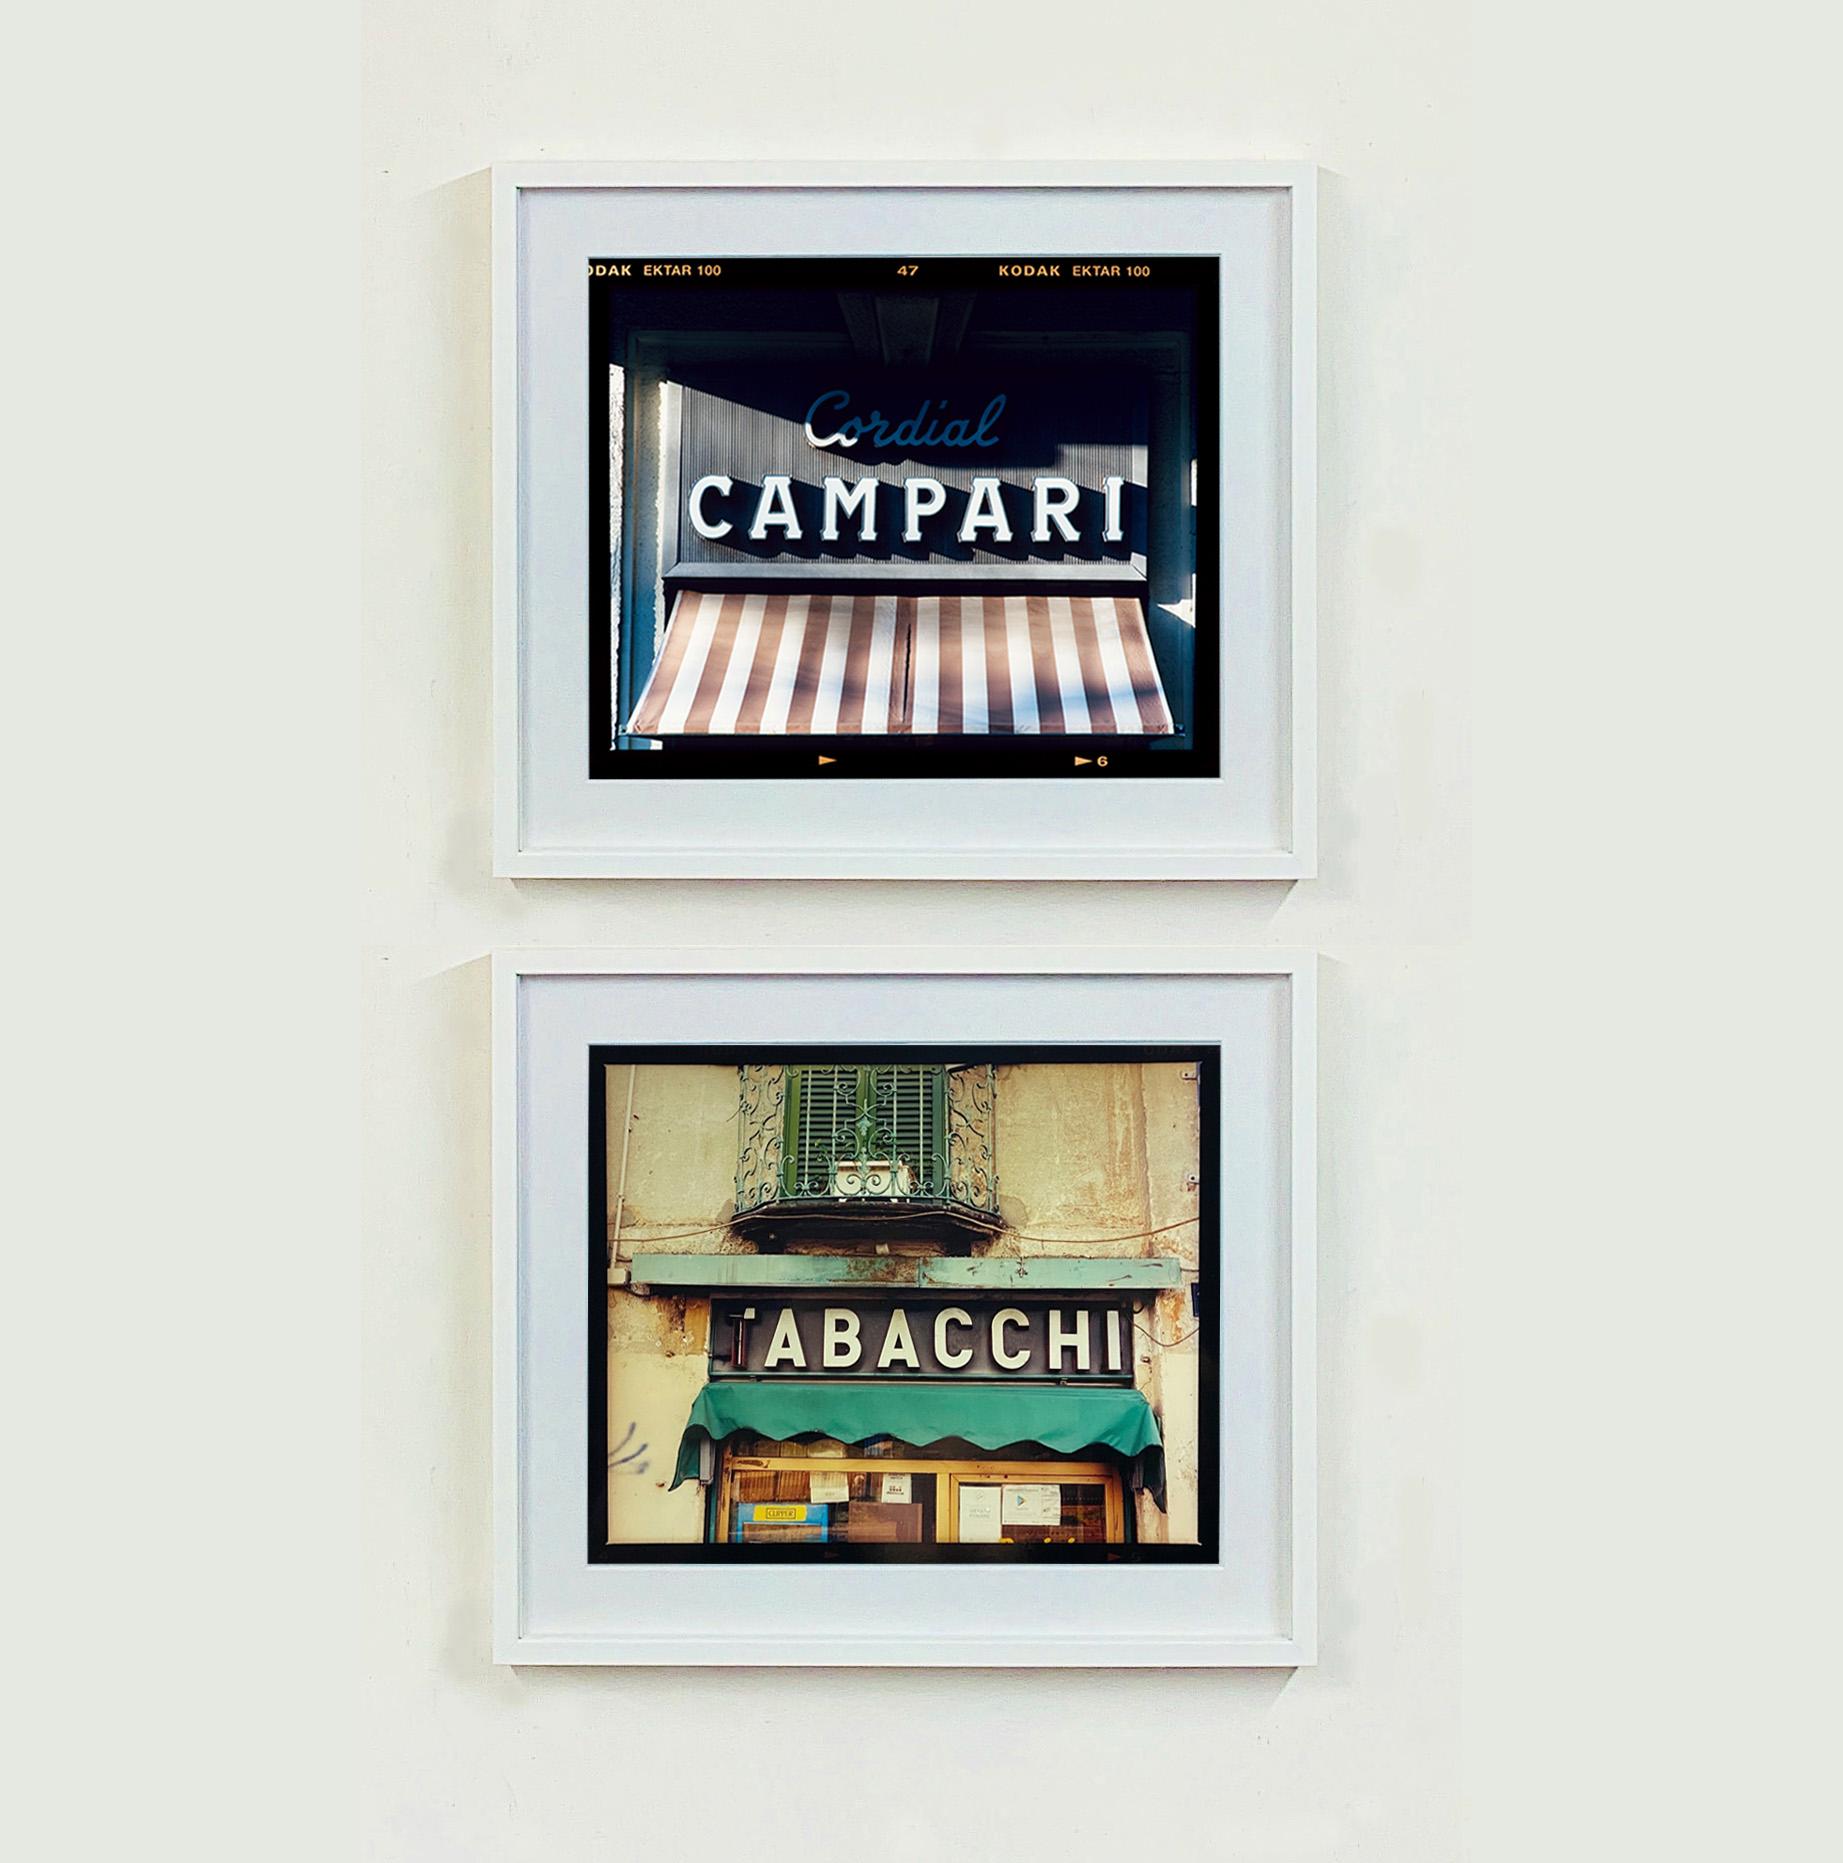 TABACCHI Sign, Milan - Architectural Color Photography For Sale 4